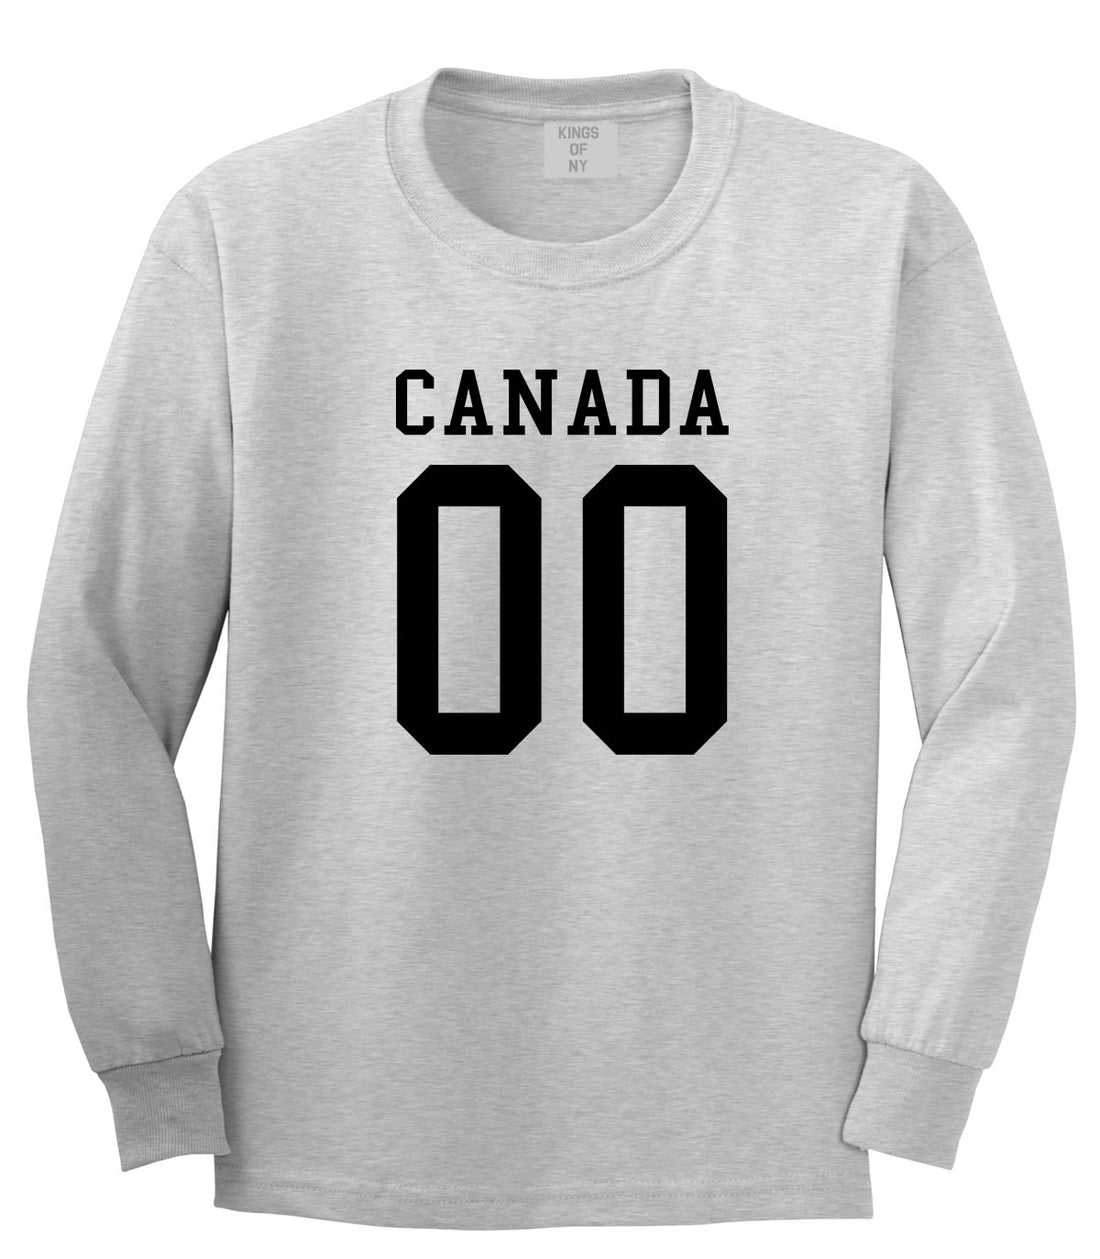 Canada Team 00 Jersey Long Sleeve T-Shirt in Grey By Kings Of NY